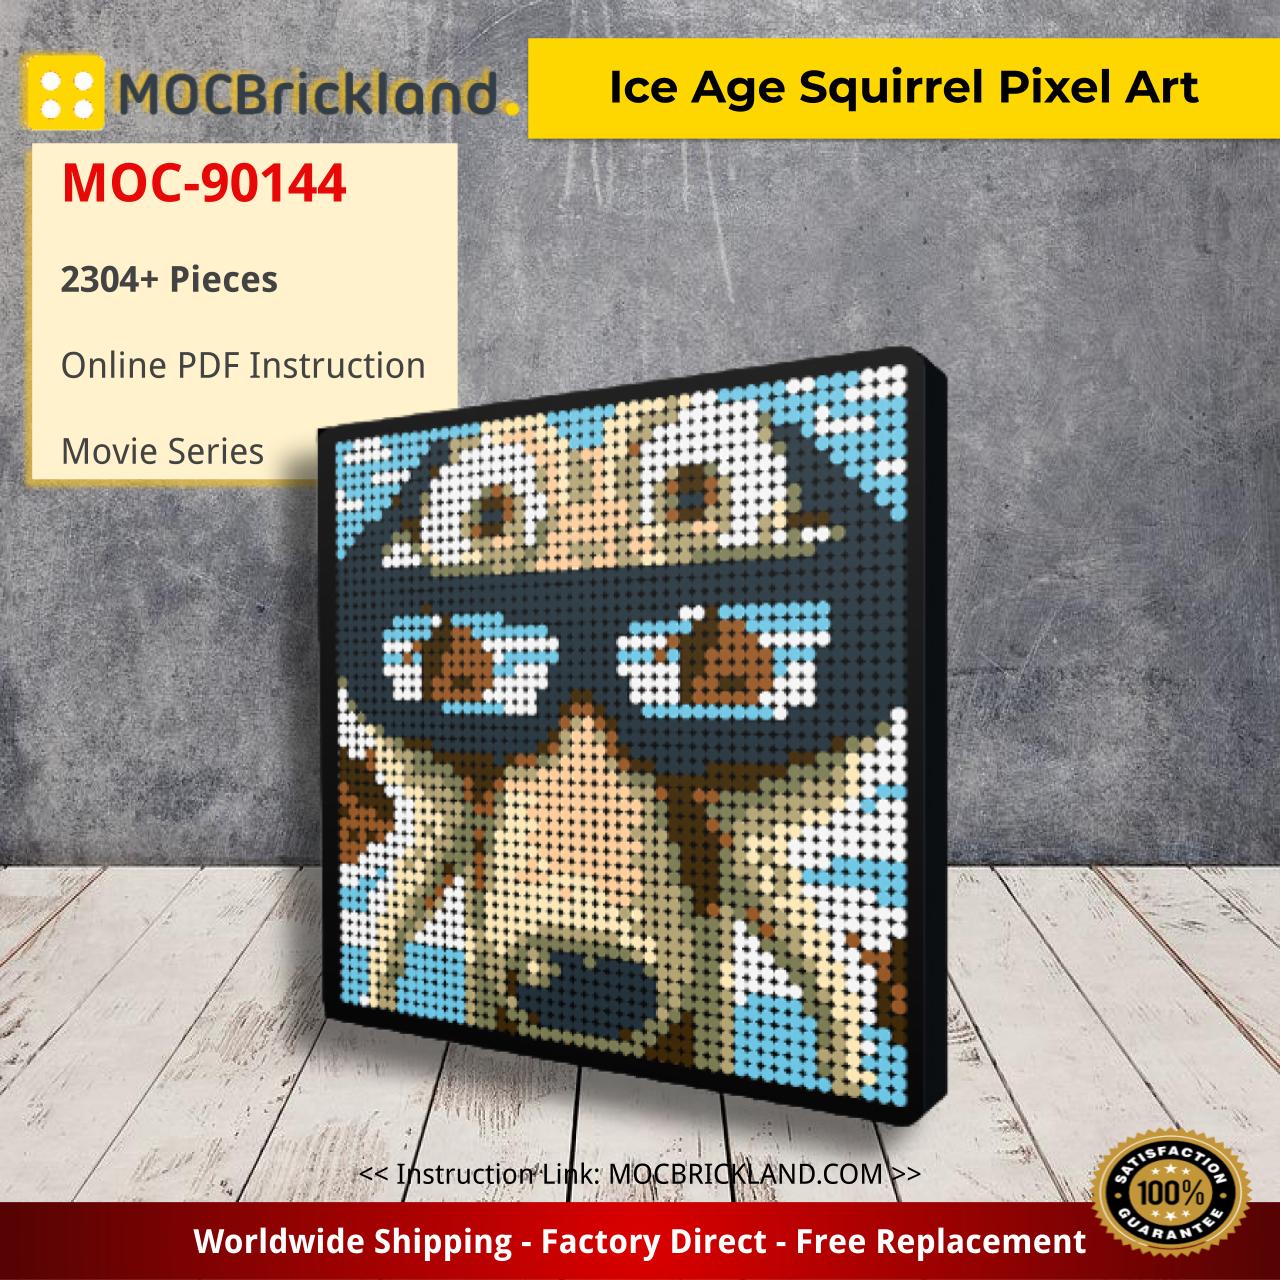 Ice Age Squirrel Pixel Art Movie MOC-90144 with 2304 pieces